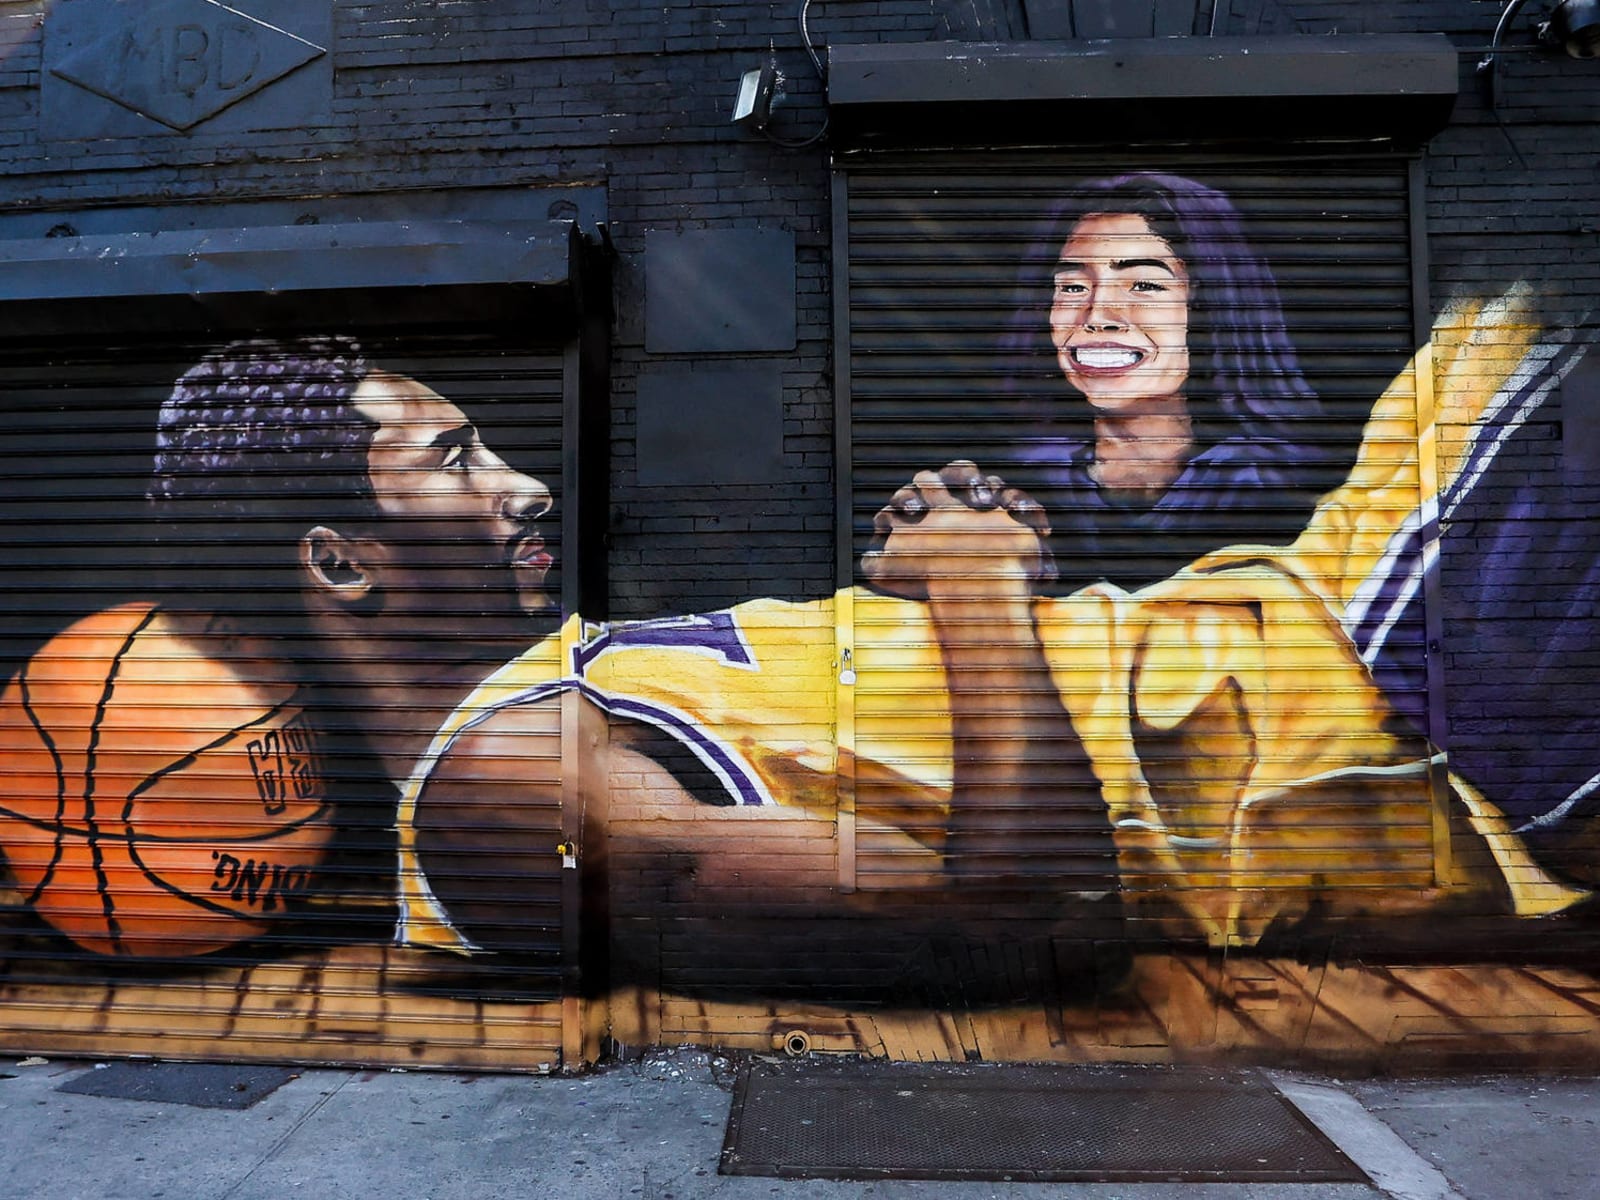 Mamba Week: Nike honors Kobe Bryant with new sneaker, jersey releases on  8/24